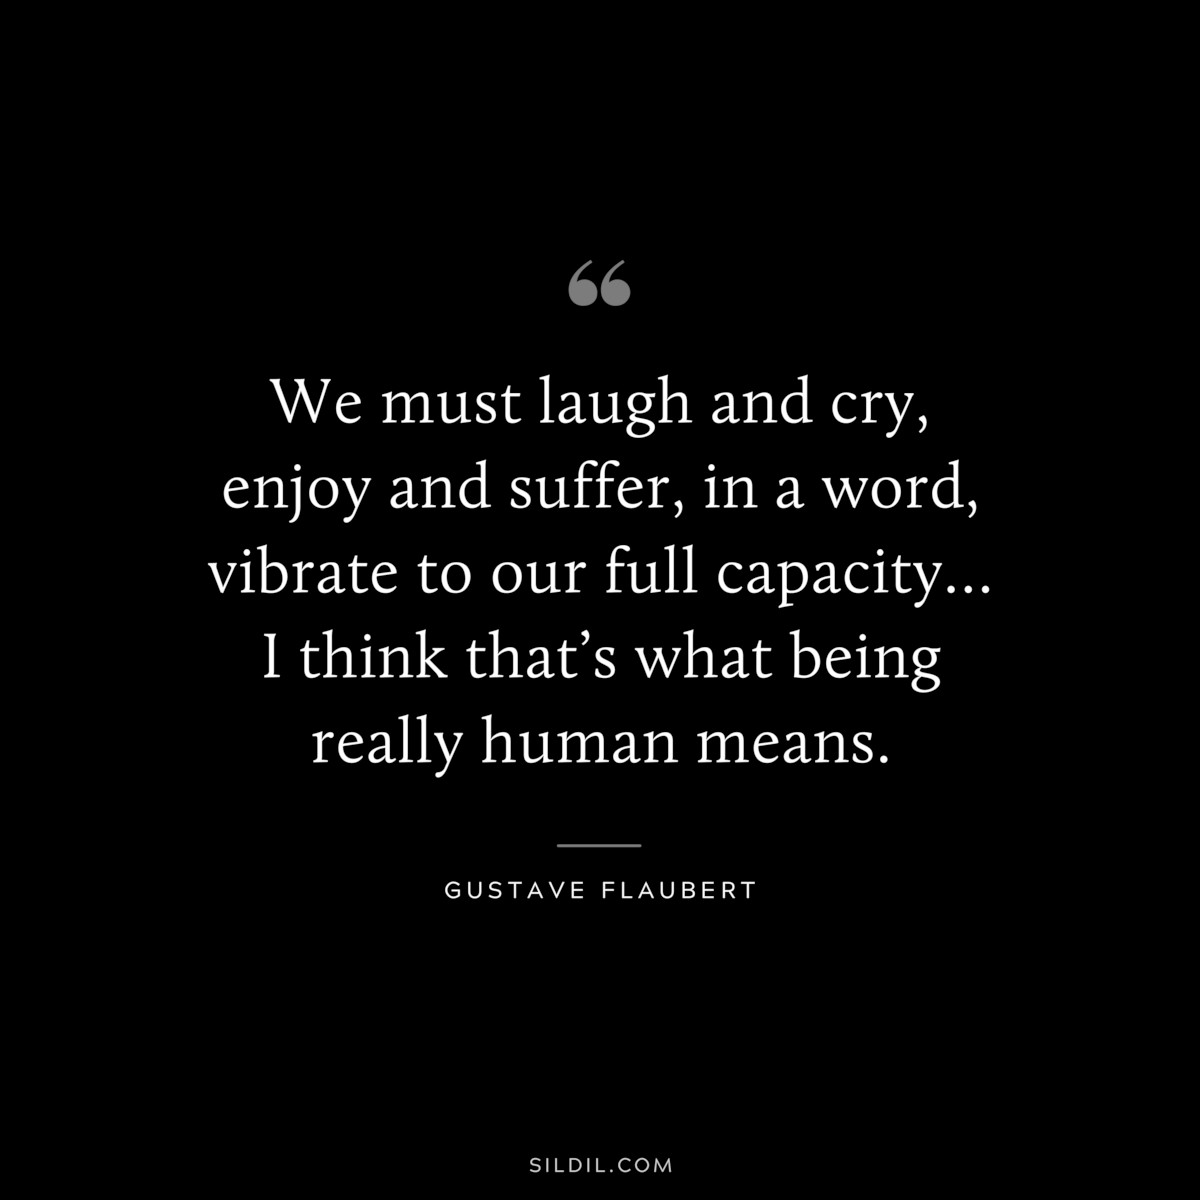 We must laugh and cry, enjoy and suffer, in a word, vibrate to our full capacity… I think that’s what being really human means. ― Gustave Flaubert